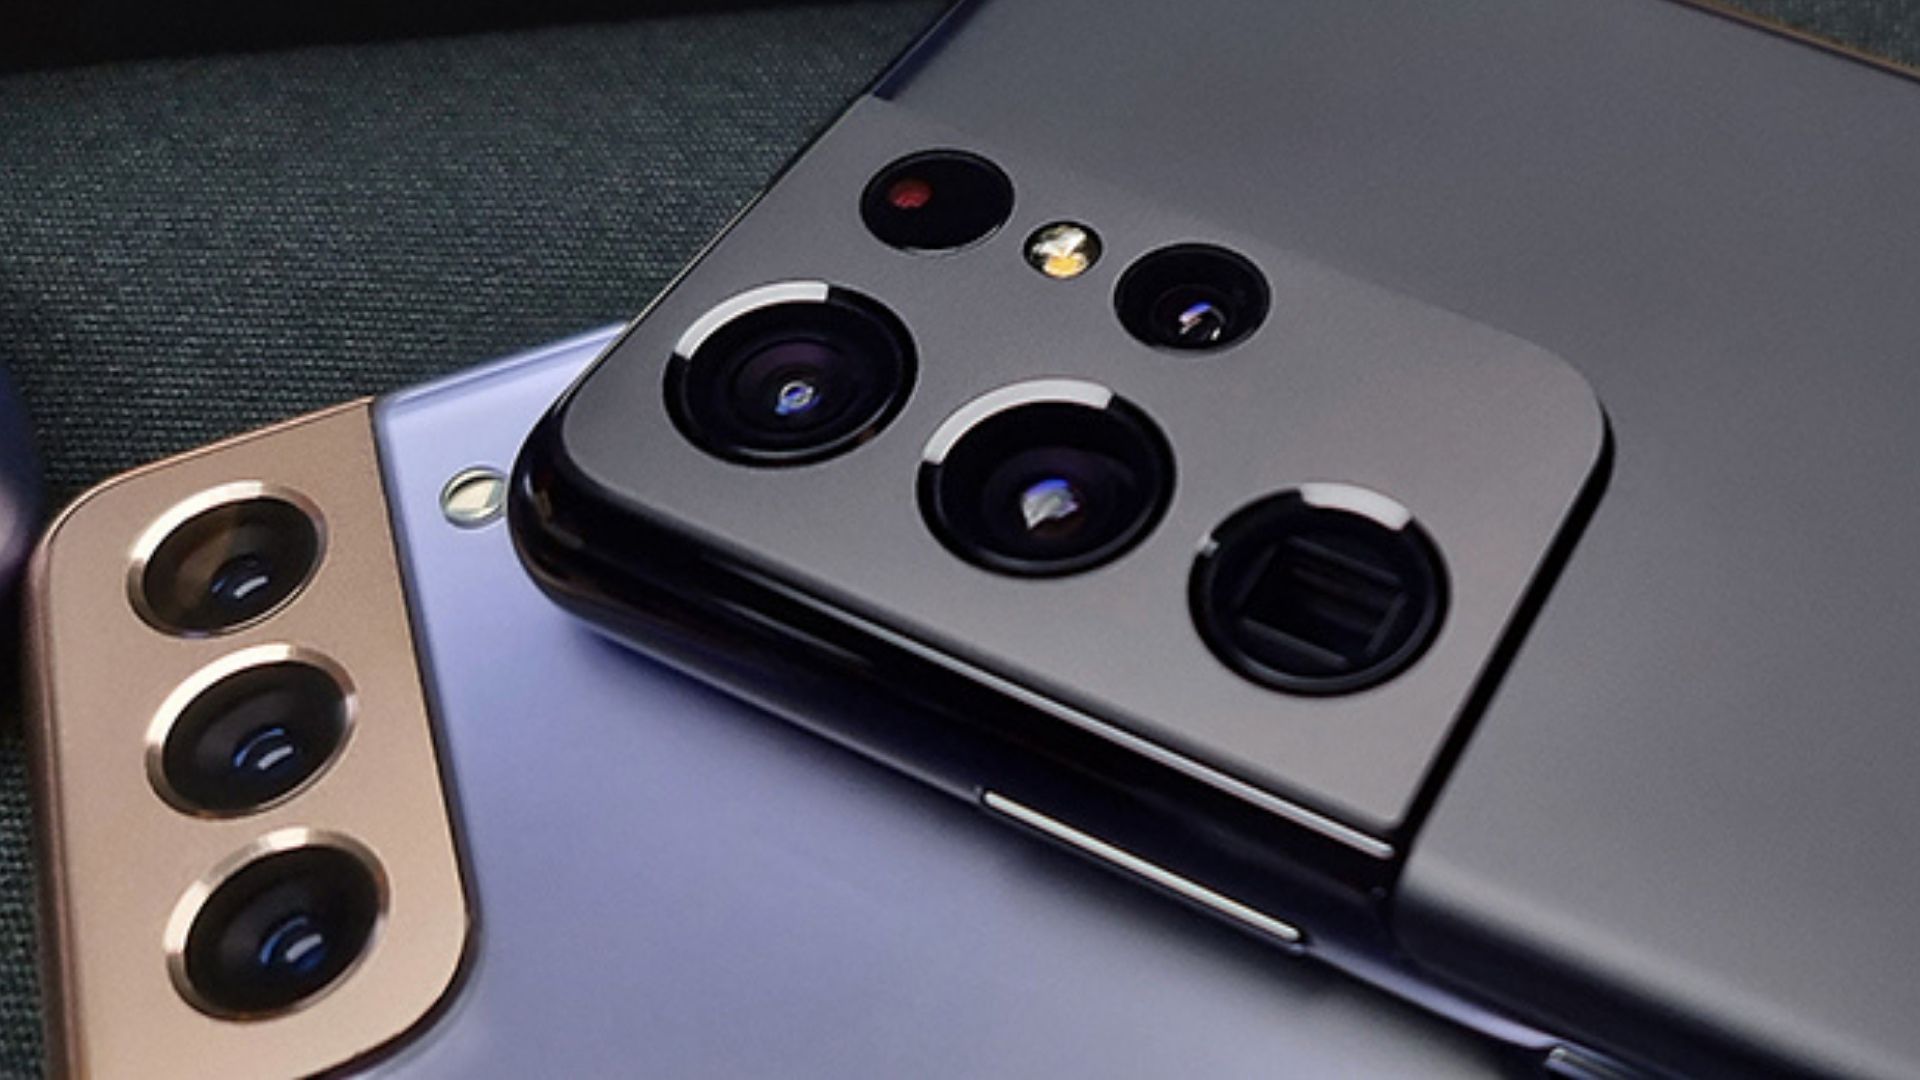 7 Phones that Has the Best Camera Quality